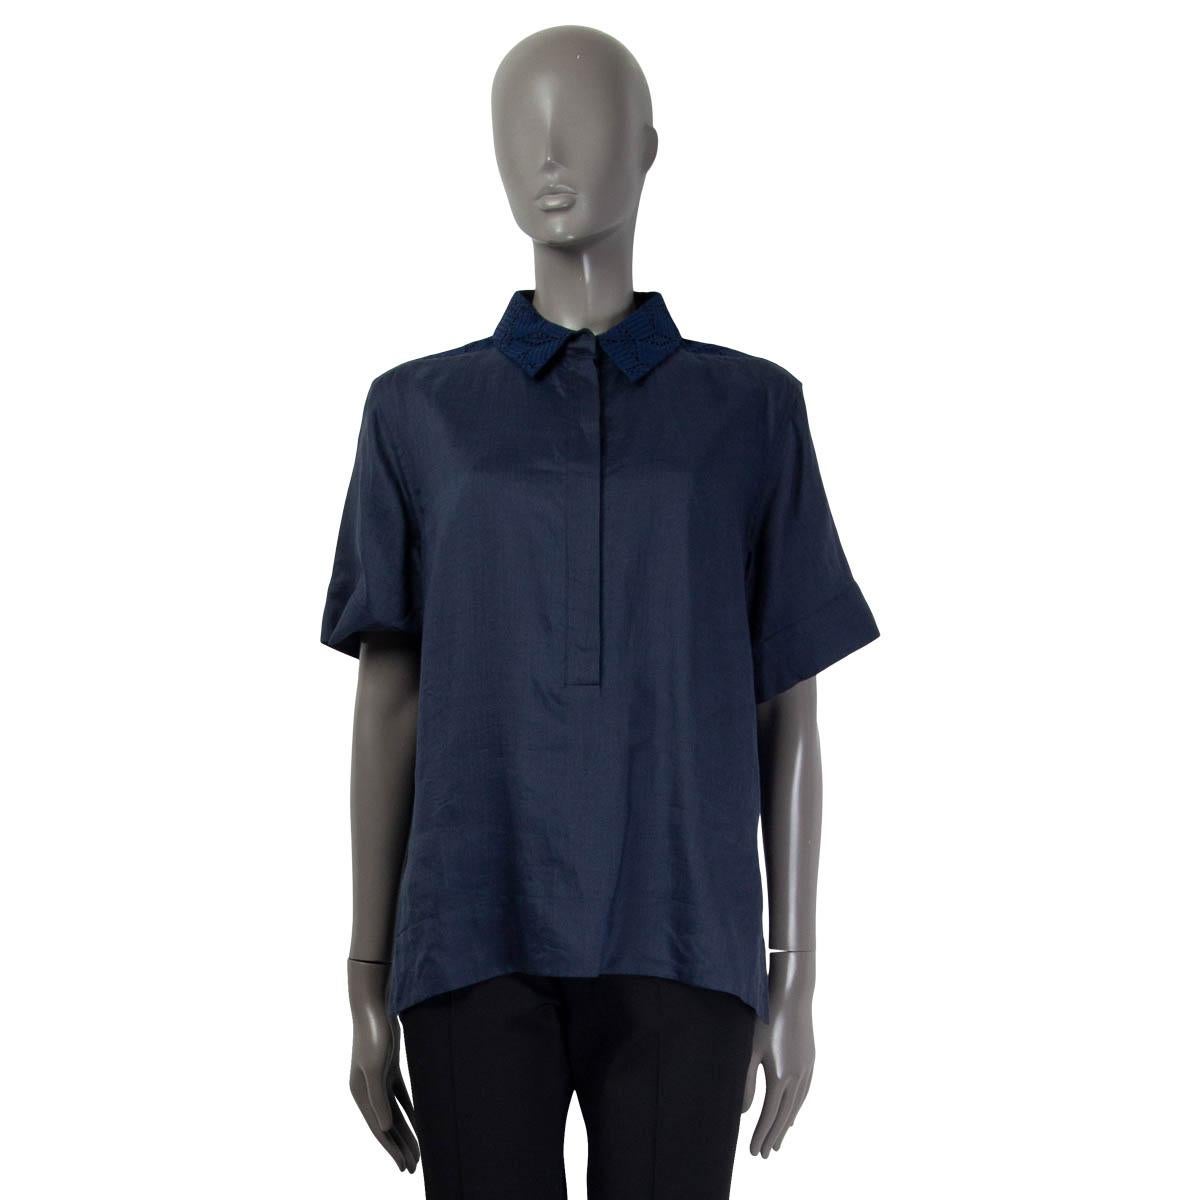 Black LOUIS VUITTON navy blue ramie 2013 BRODERIE ANGLAISE Button Up Shirt 38 S